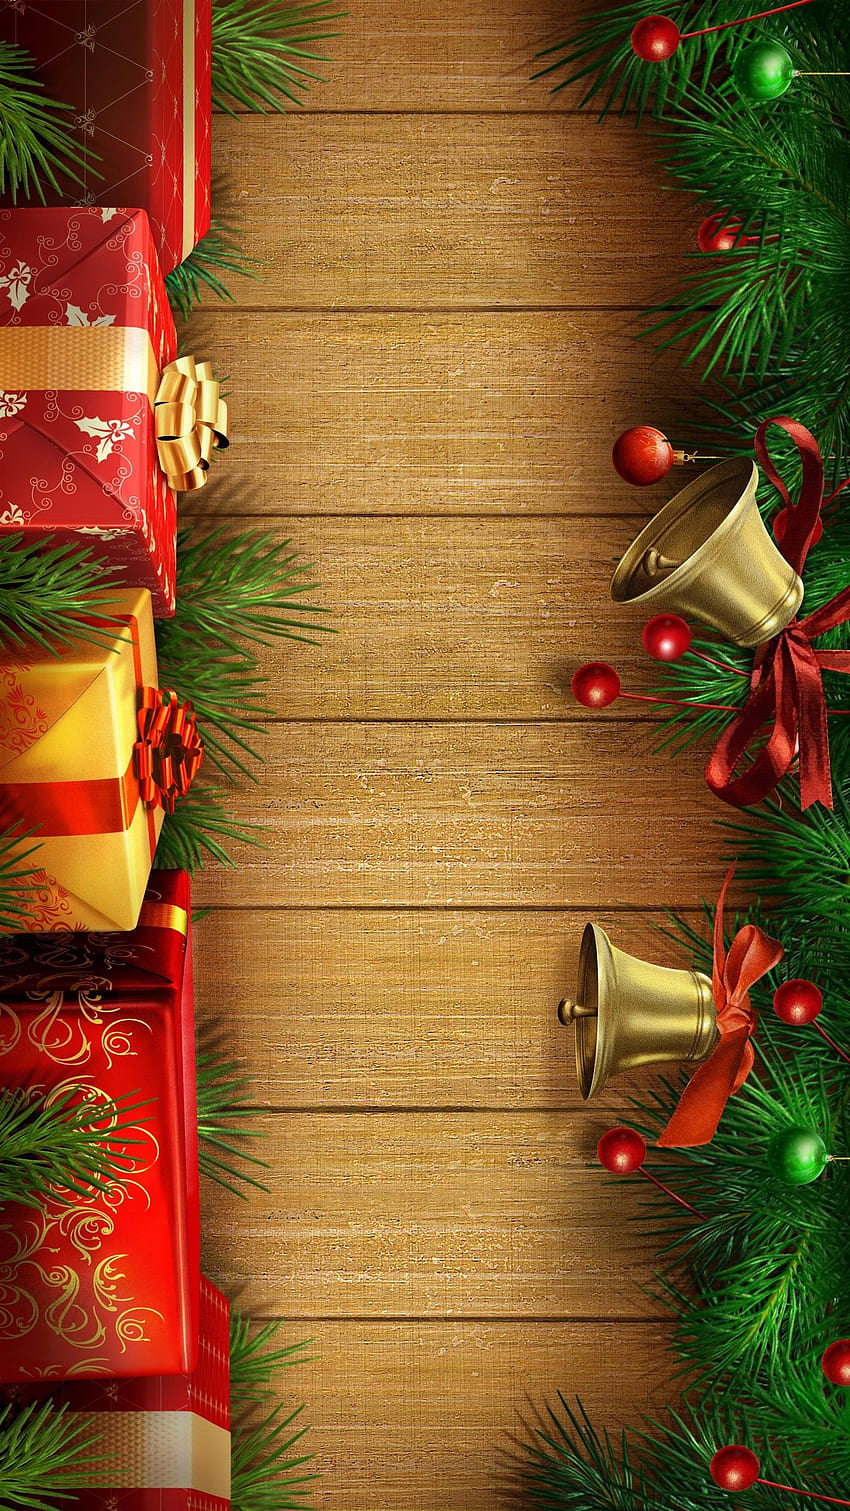 Christmas Presents and Decorations iPhone 5, christmas ornament iphone HD phone wallpaper